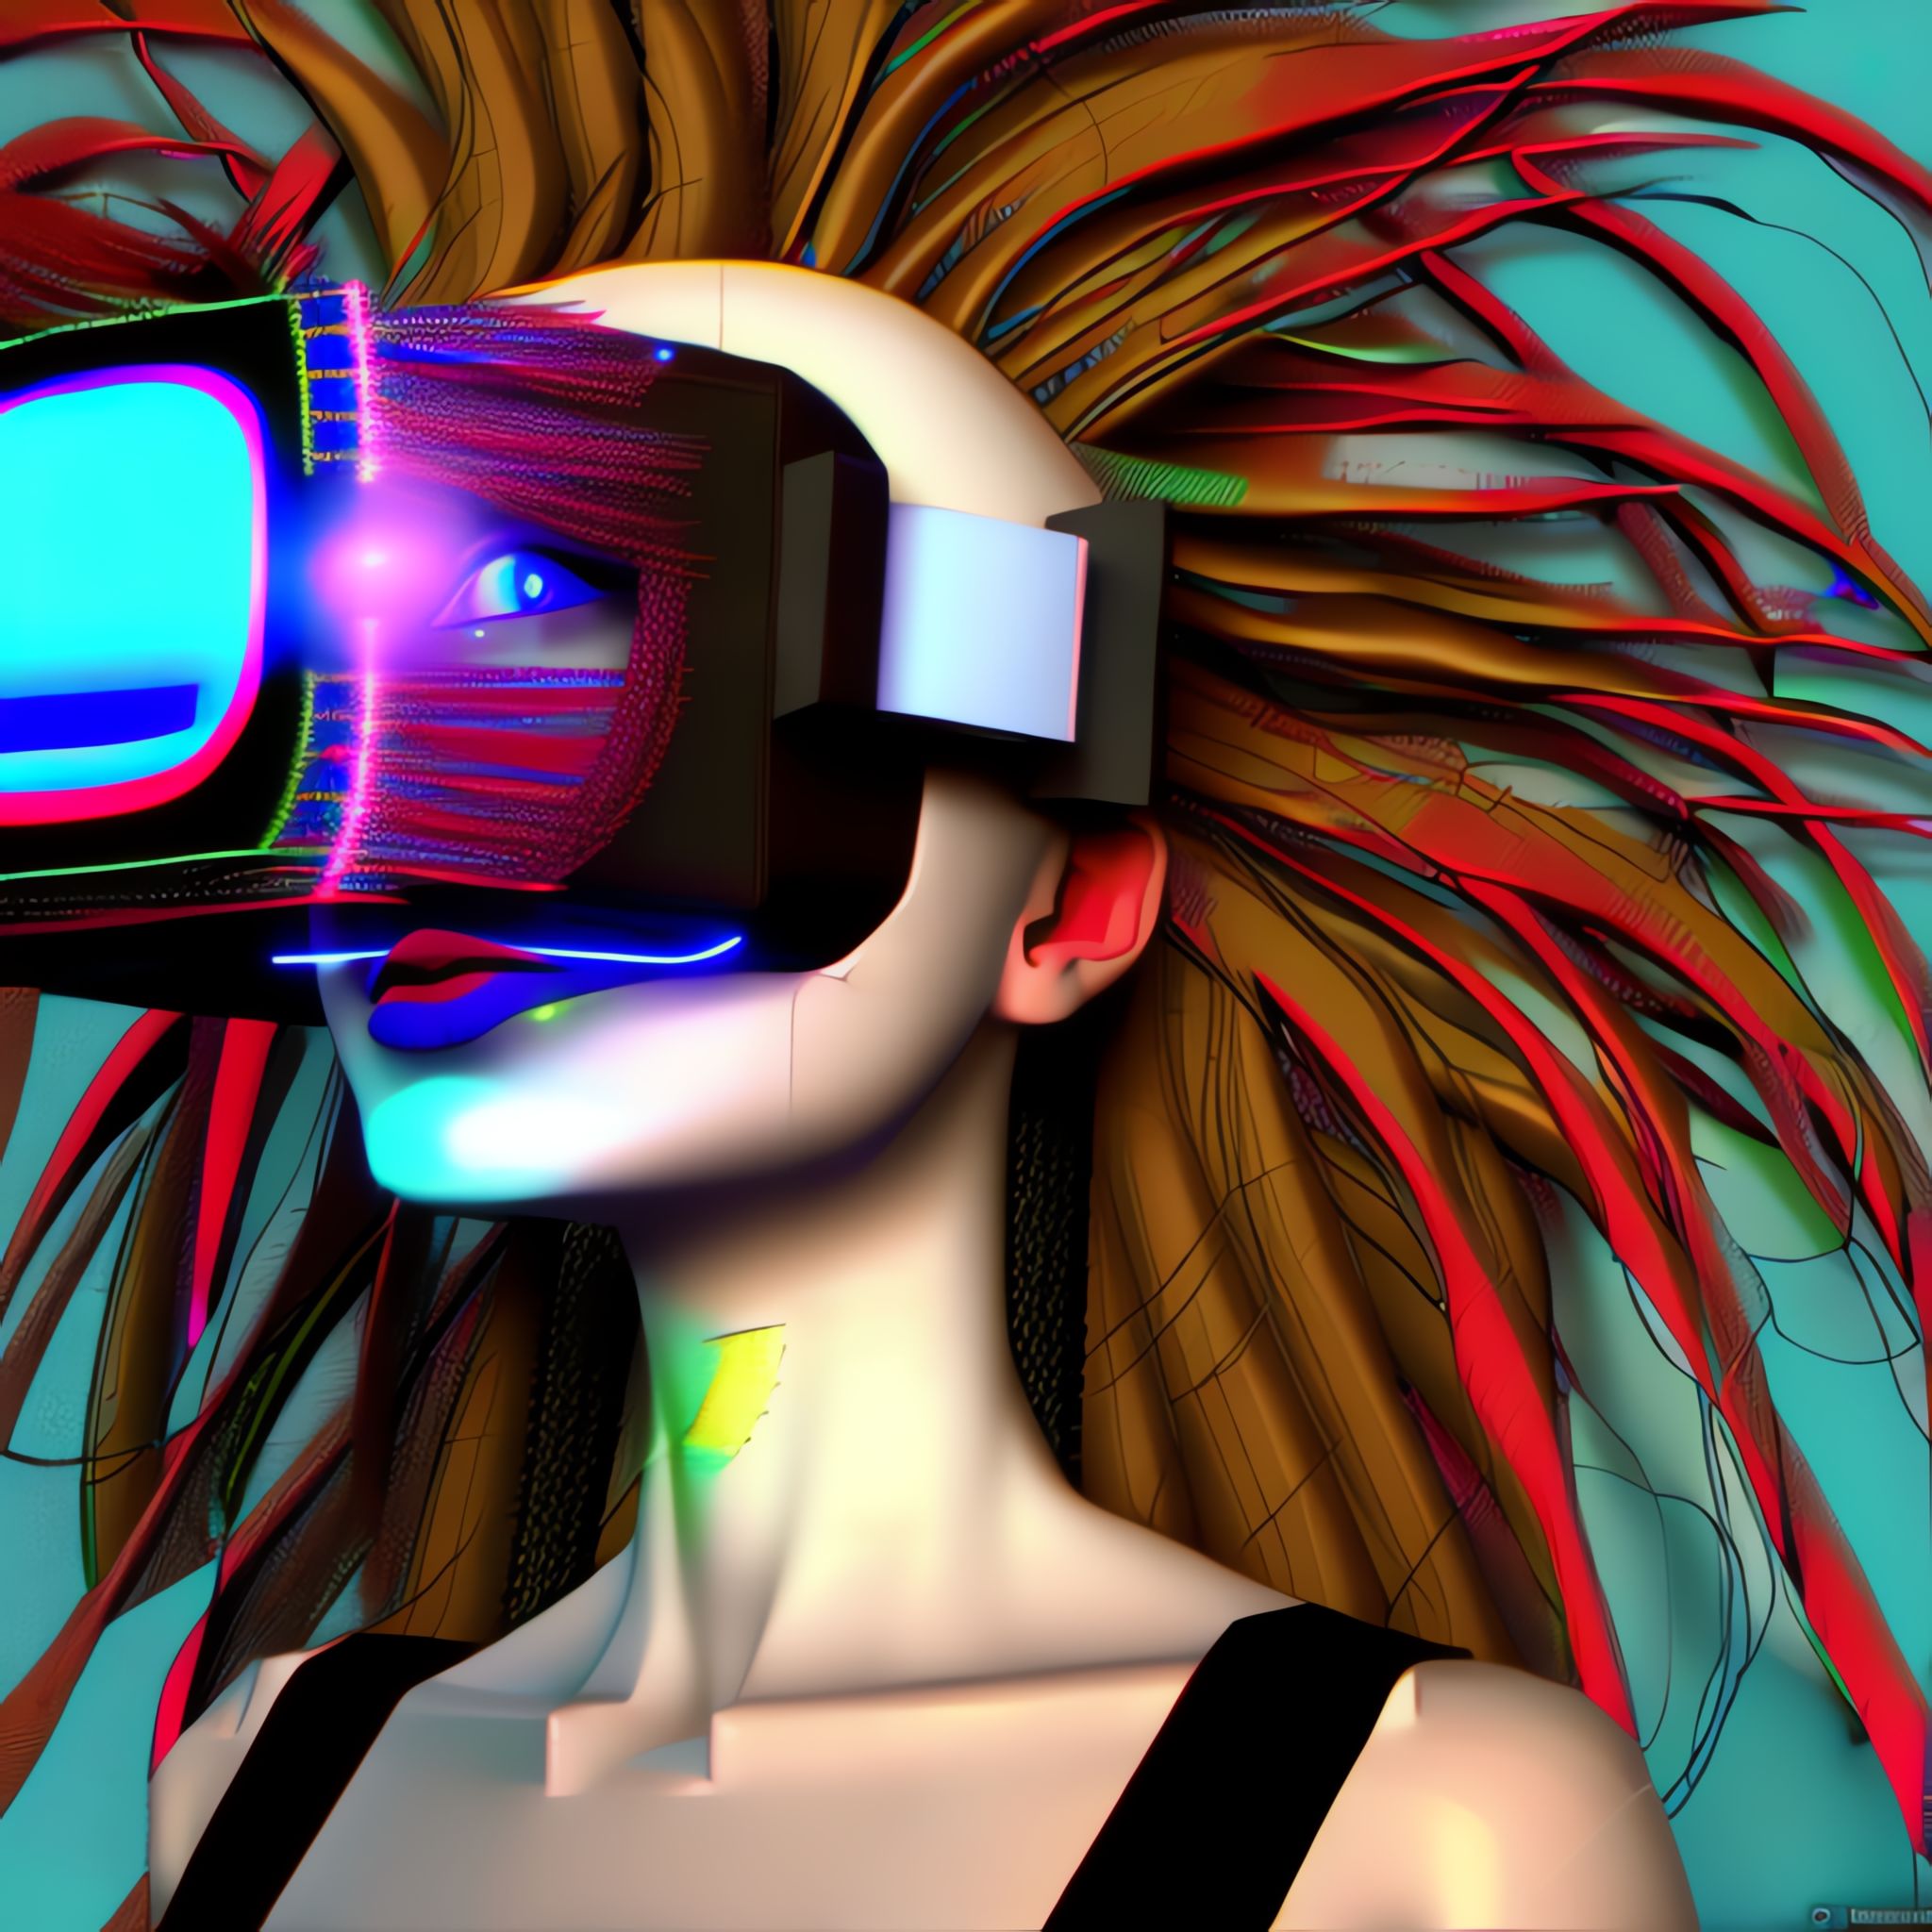 Head-of-girl-with-VR-headset-Wild-hair-colorful-makeup-Metaverse-Oculus-VR-Future-technical-d-hoe7